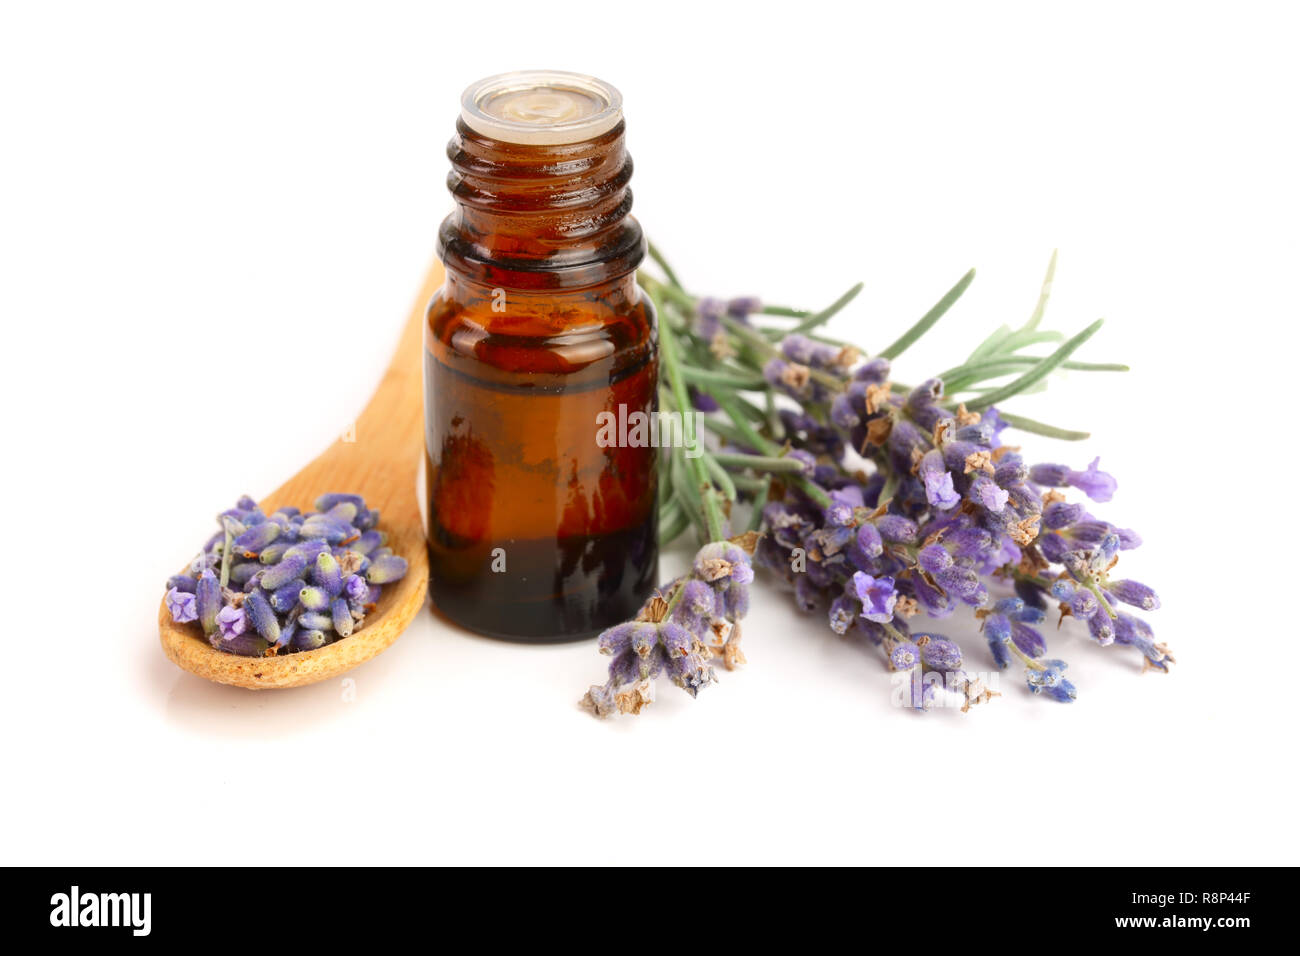 Bottle with aroma oil and lavender flowers isolated on white background Stock Photo